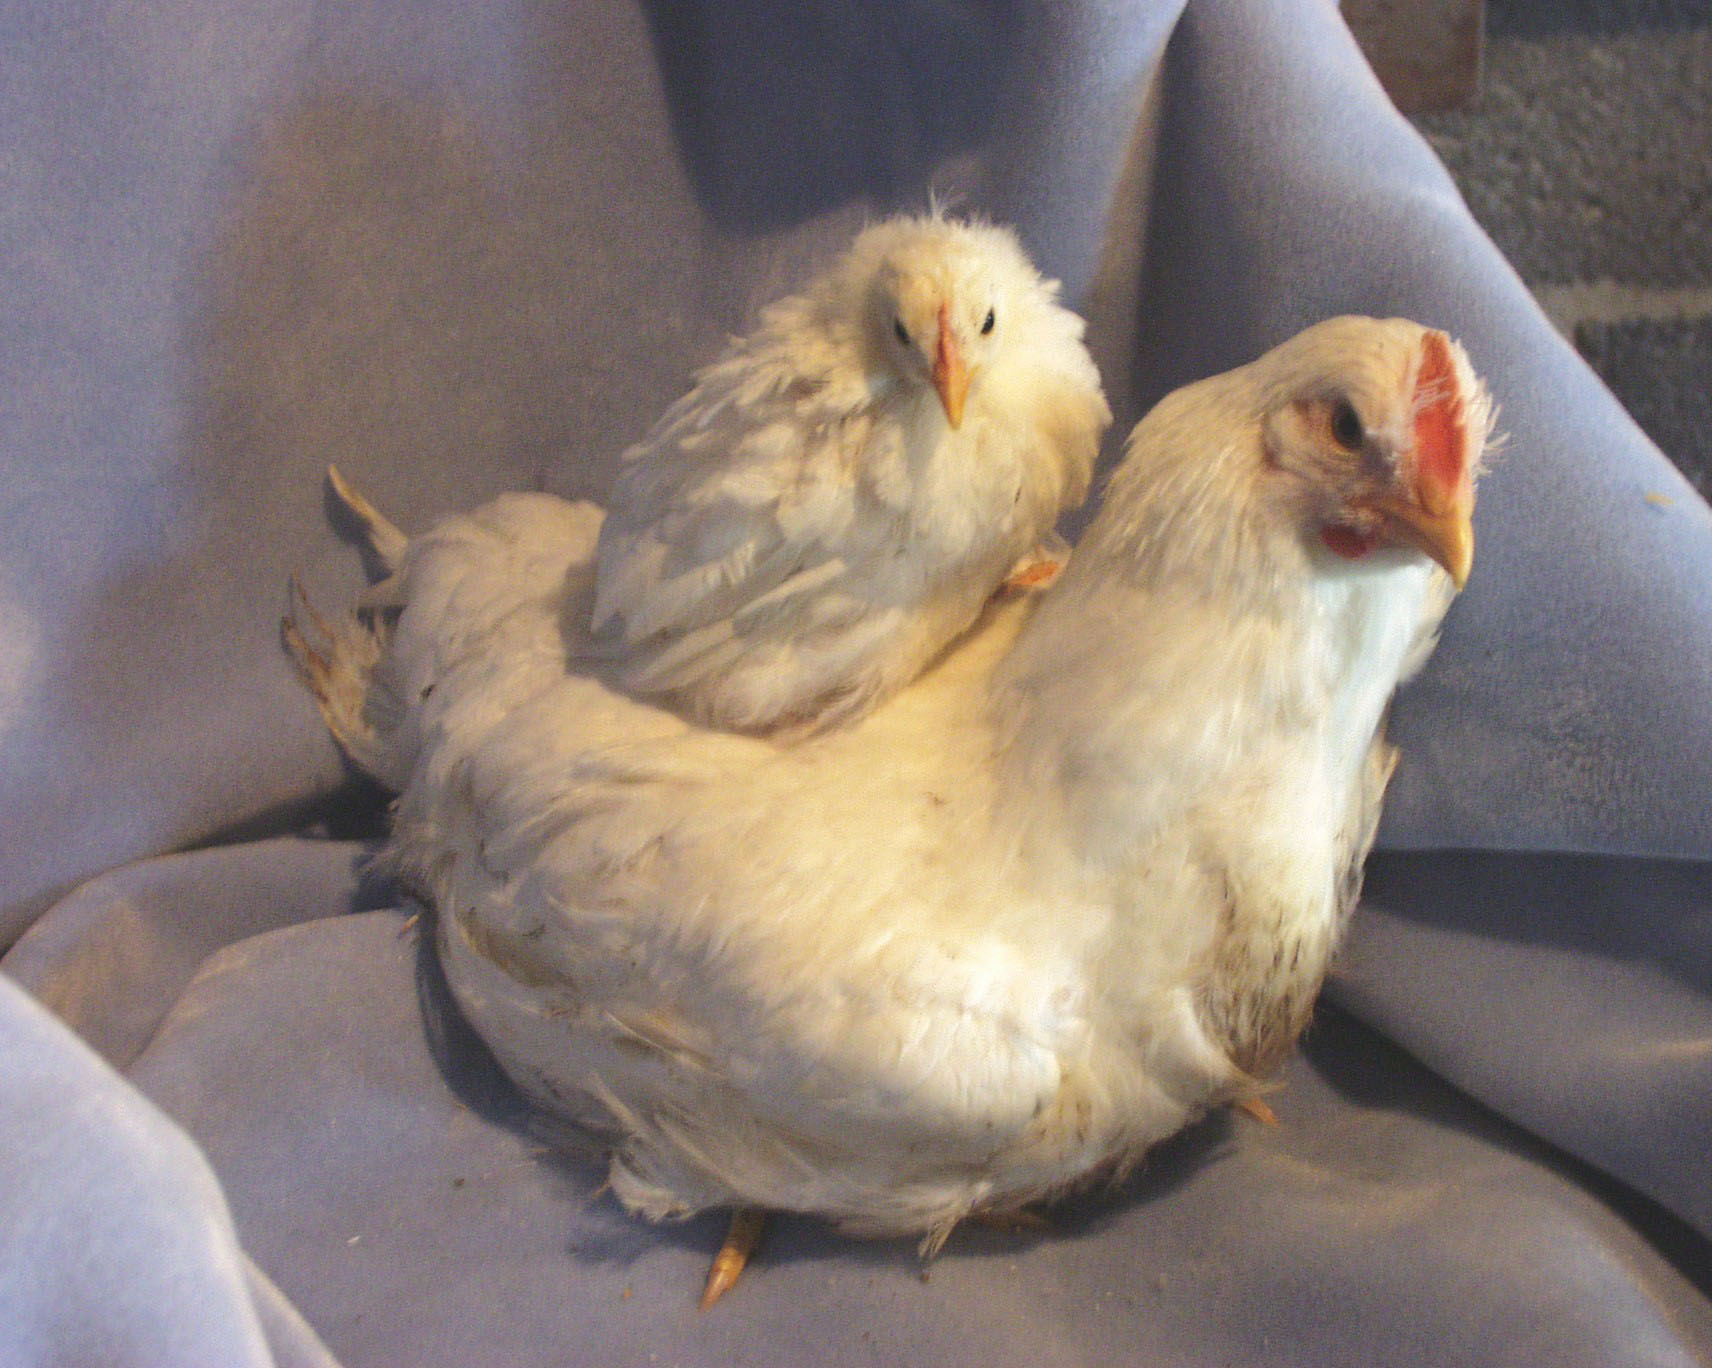 An 8-week-old high-growth chicken (bottom) is noticeably larger than a low-growth chicken (top) at the same age. On average, the high-growth chickens weigh nine times more than their low-growth counterparts.